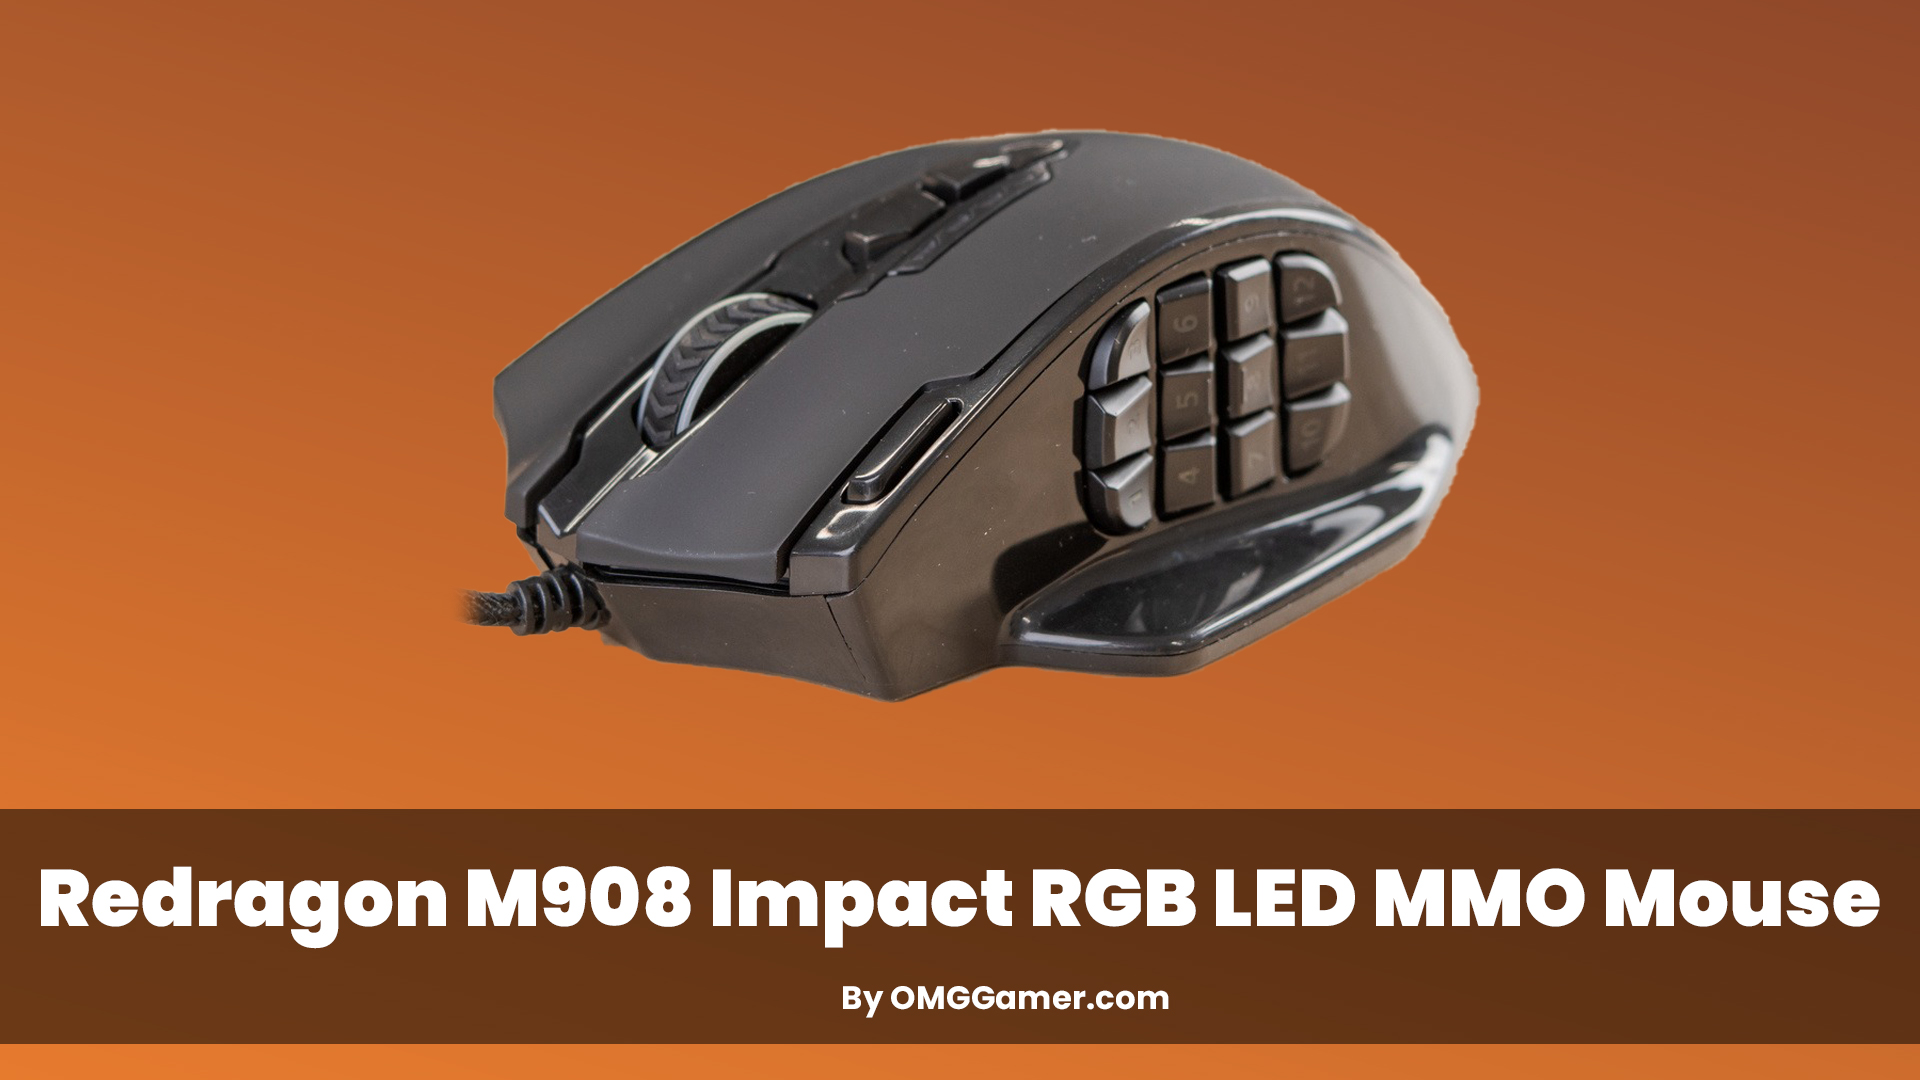 Redragon M908 Impact RGB LED MMO Mouse: Best MMO Mouse